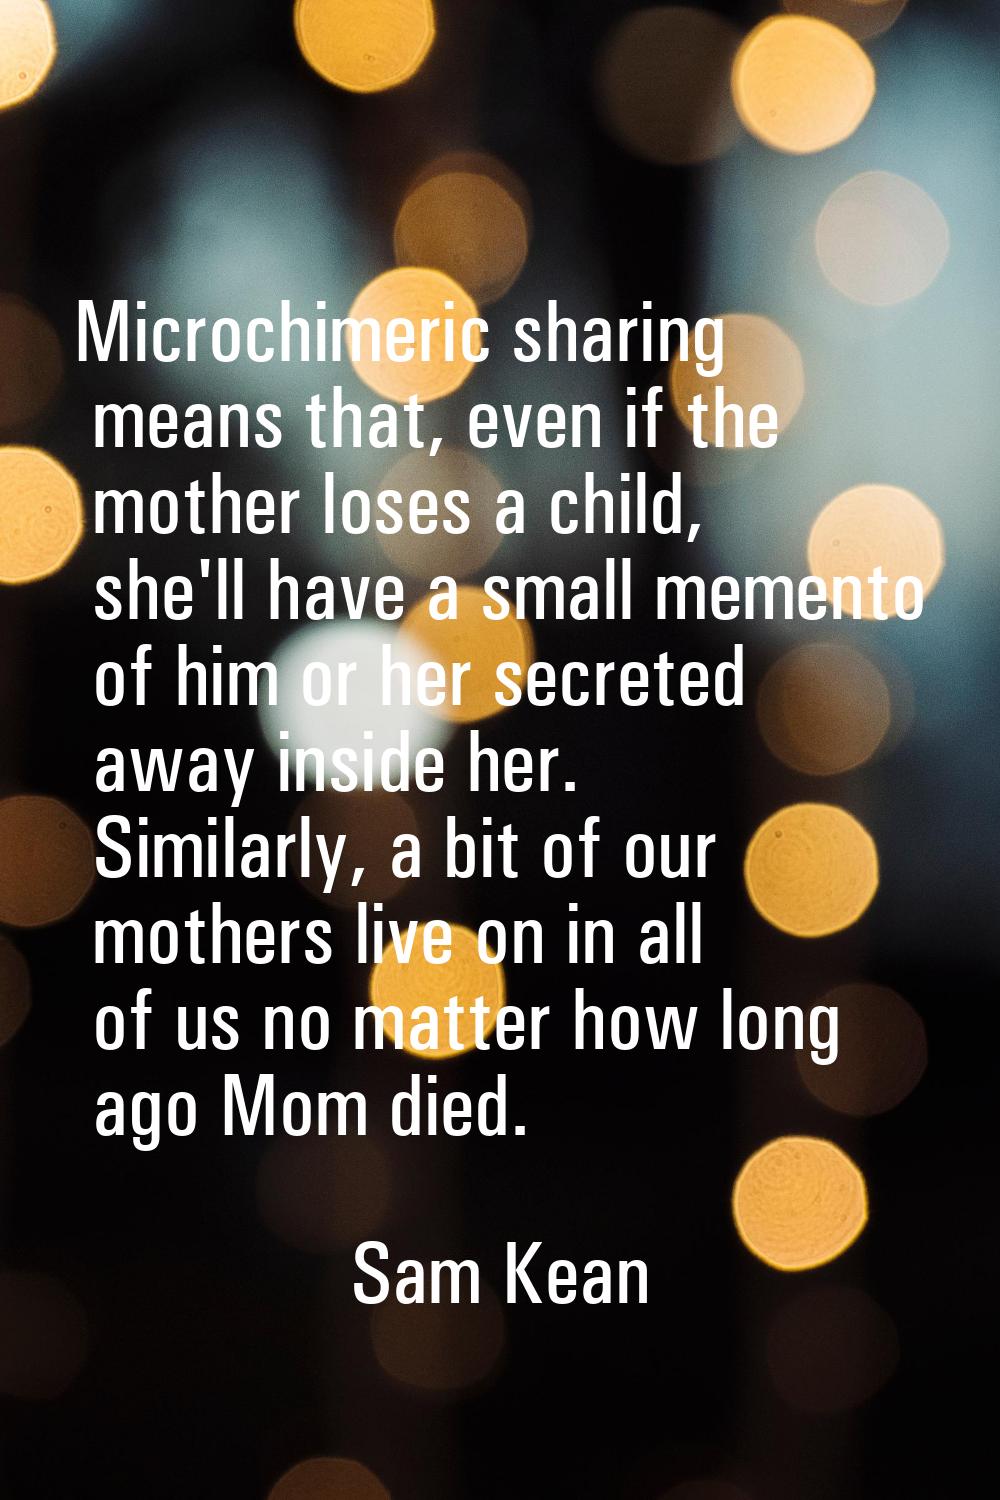 Microchimeric sharing means that, even if the mother loses a child, she'll have a small memento of 